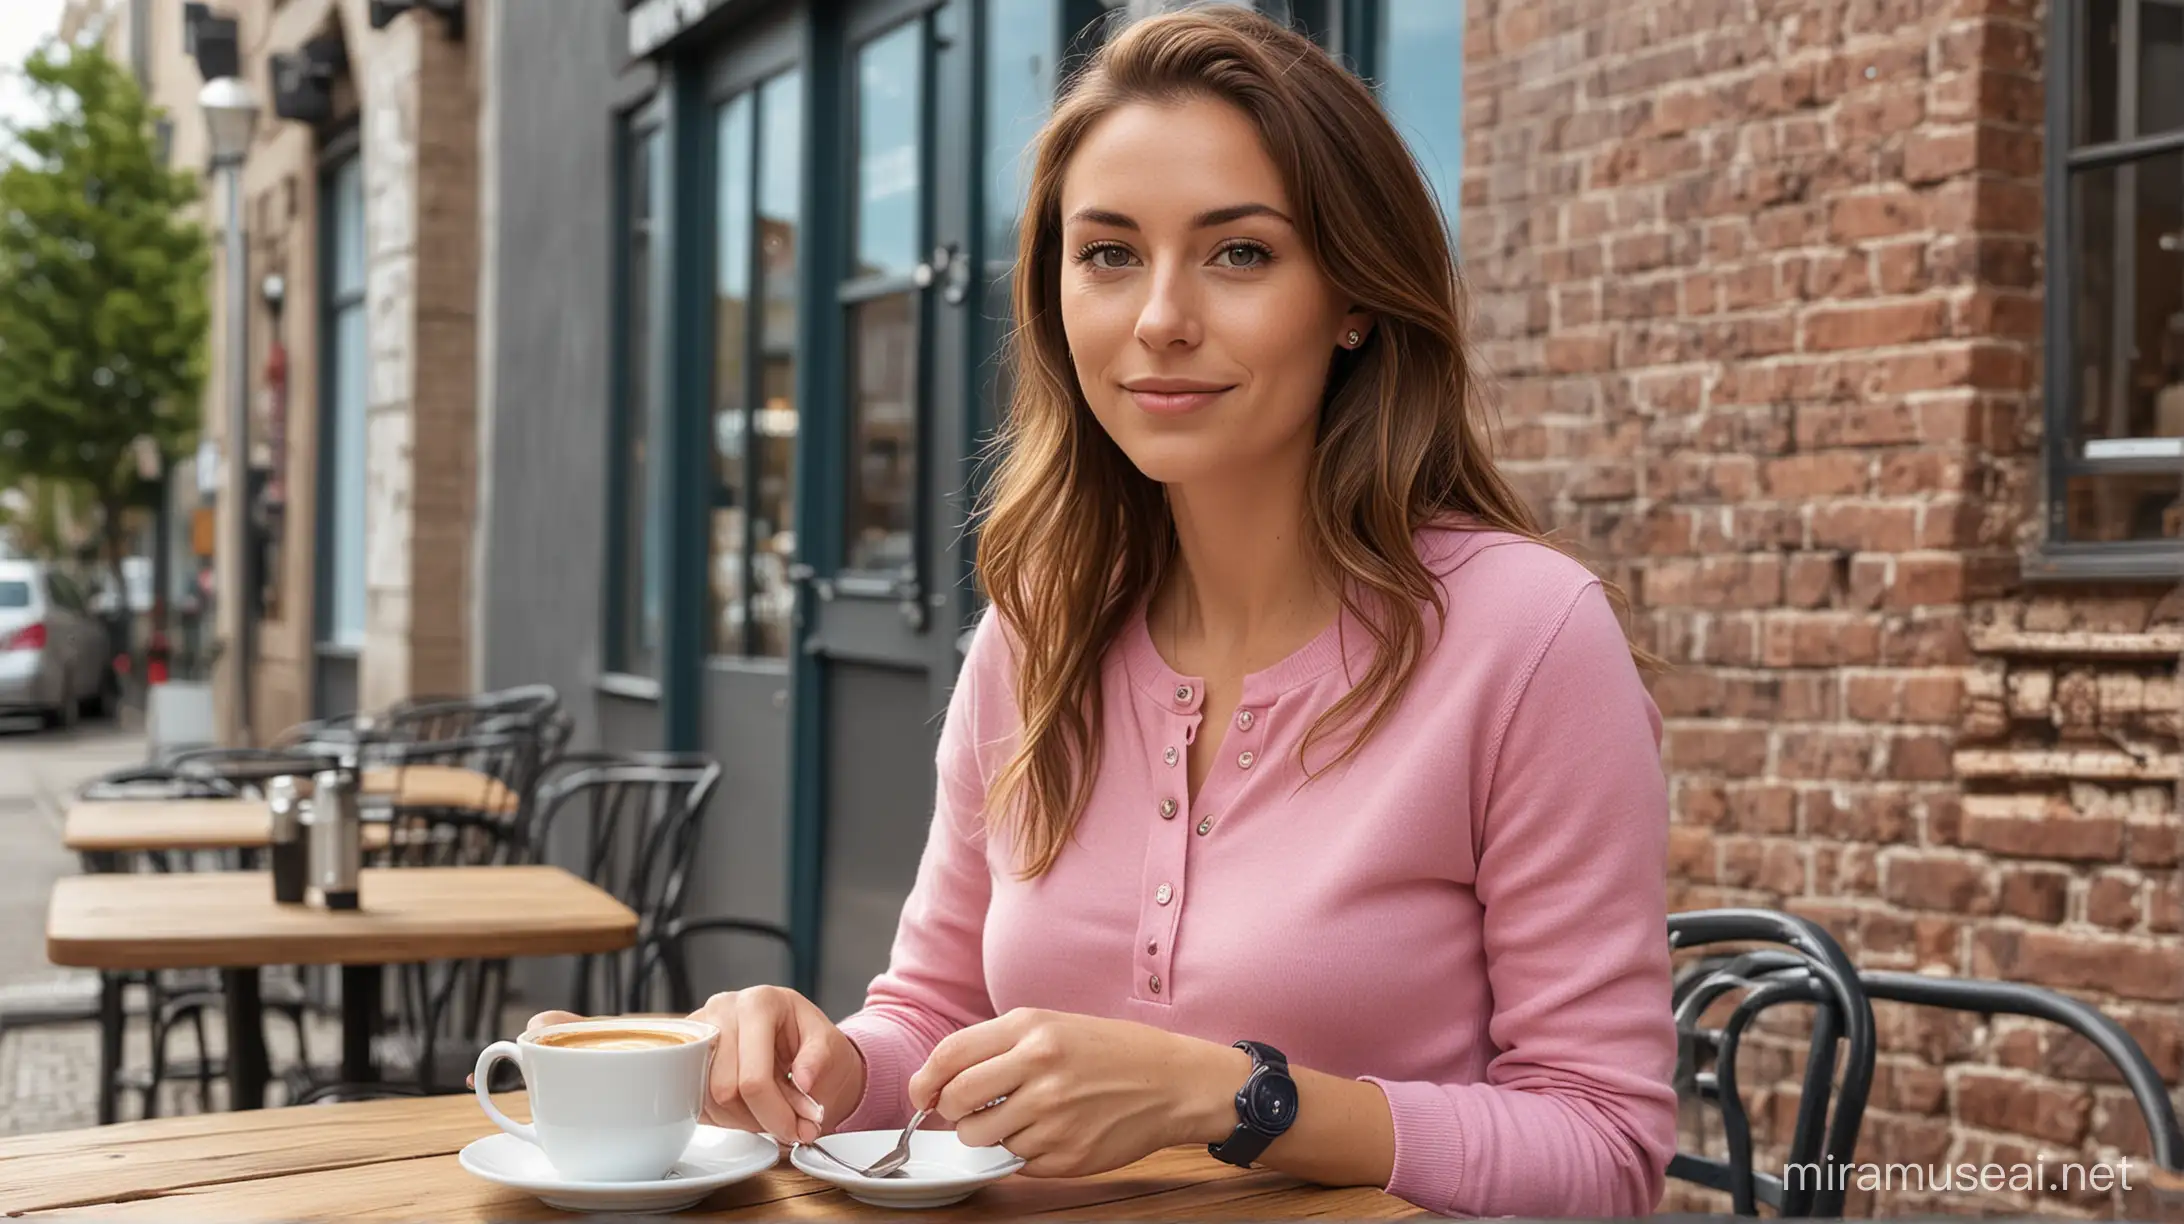 30 year old white woman with long brown hair, wearing a pink button up henley sweater and blue jeans, sitting at an outdoor urban café with coffee in a cup in a saucer on the table